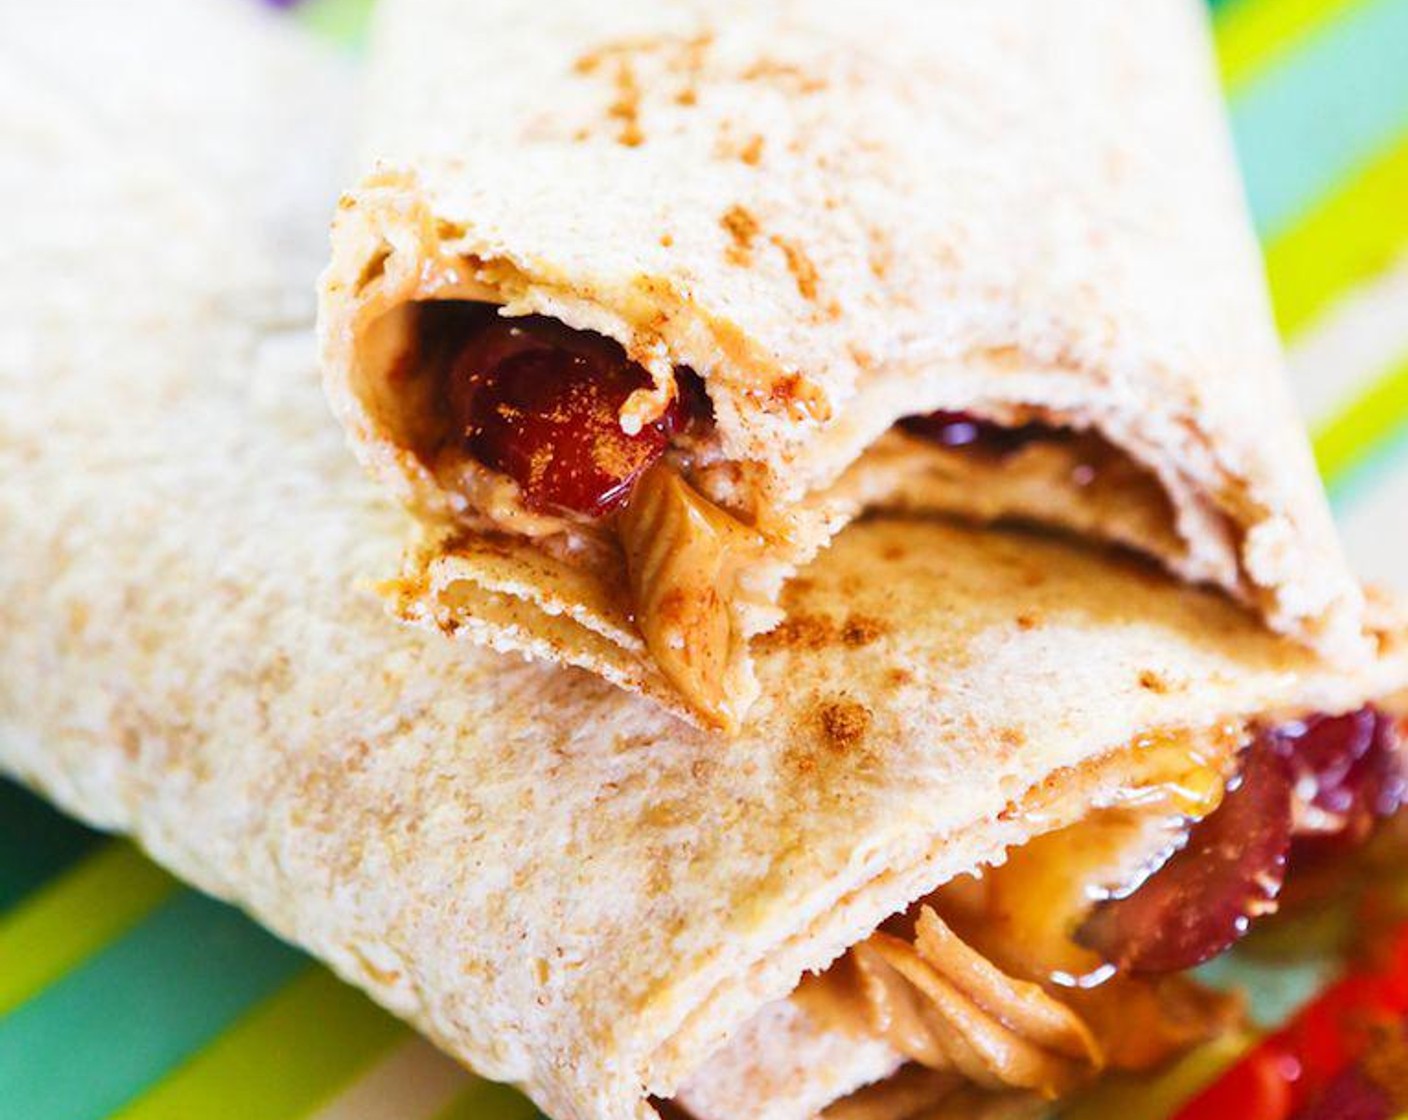 Peanut Butter and Honey Wraps with Grapes and Cinnamon